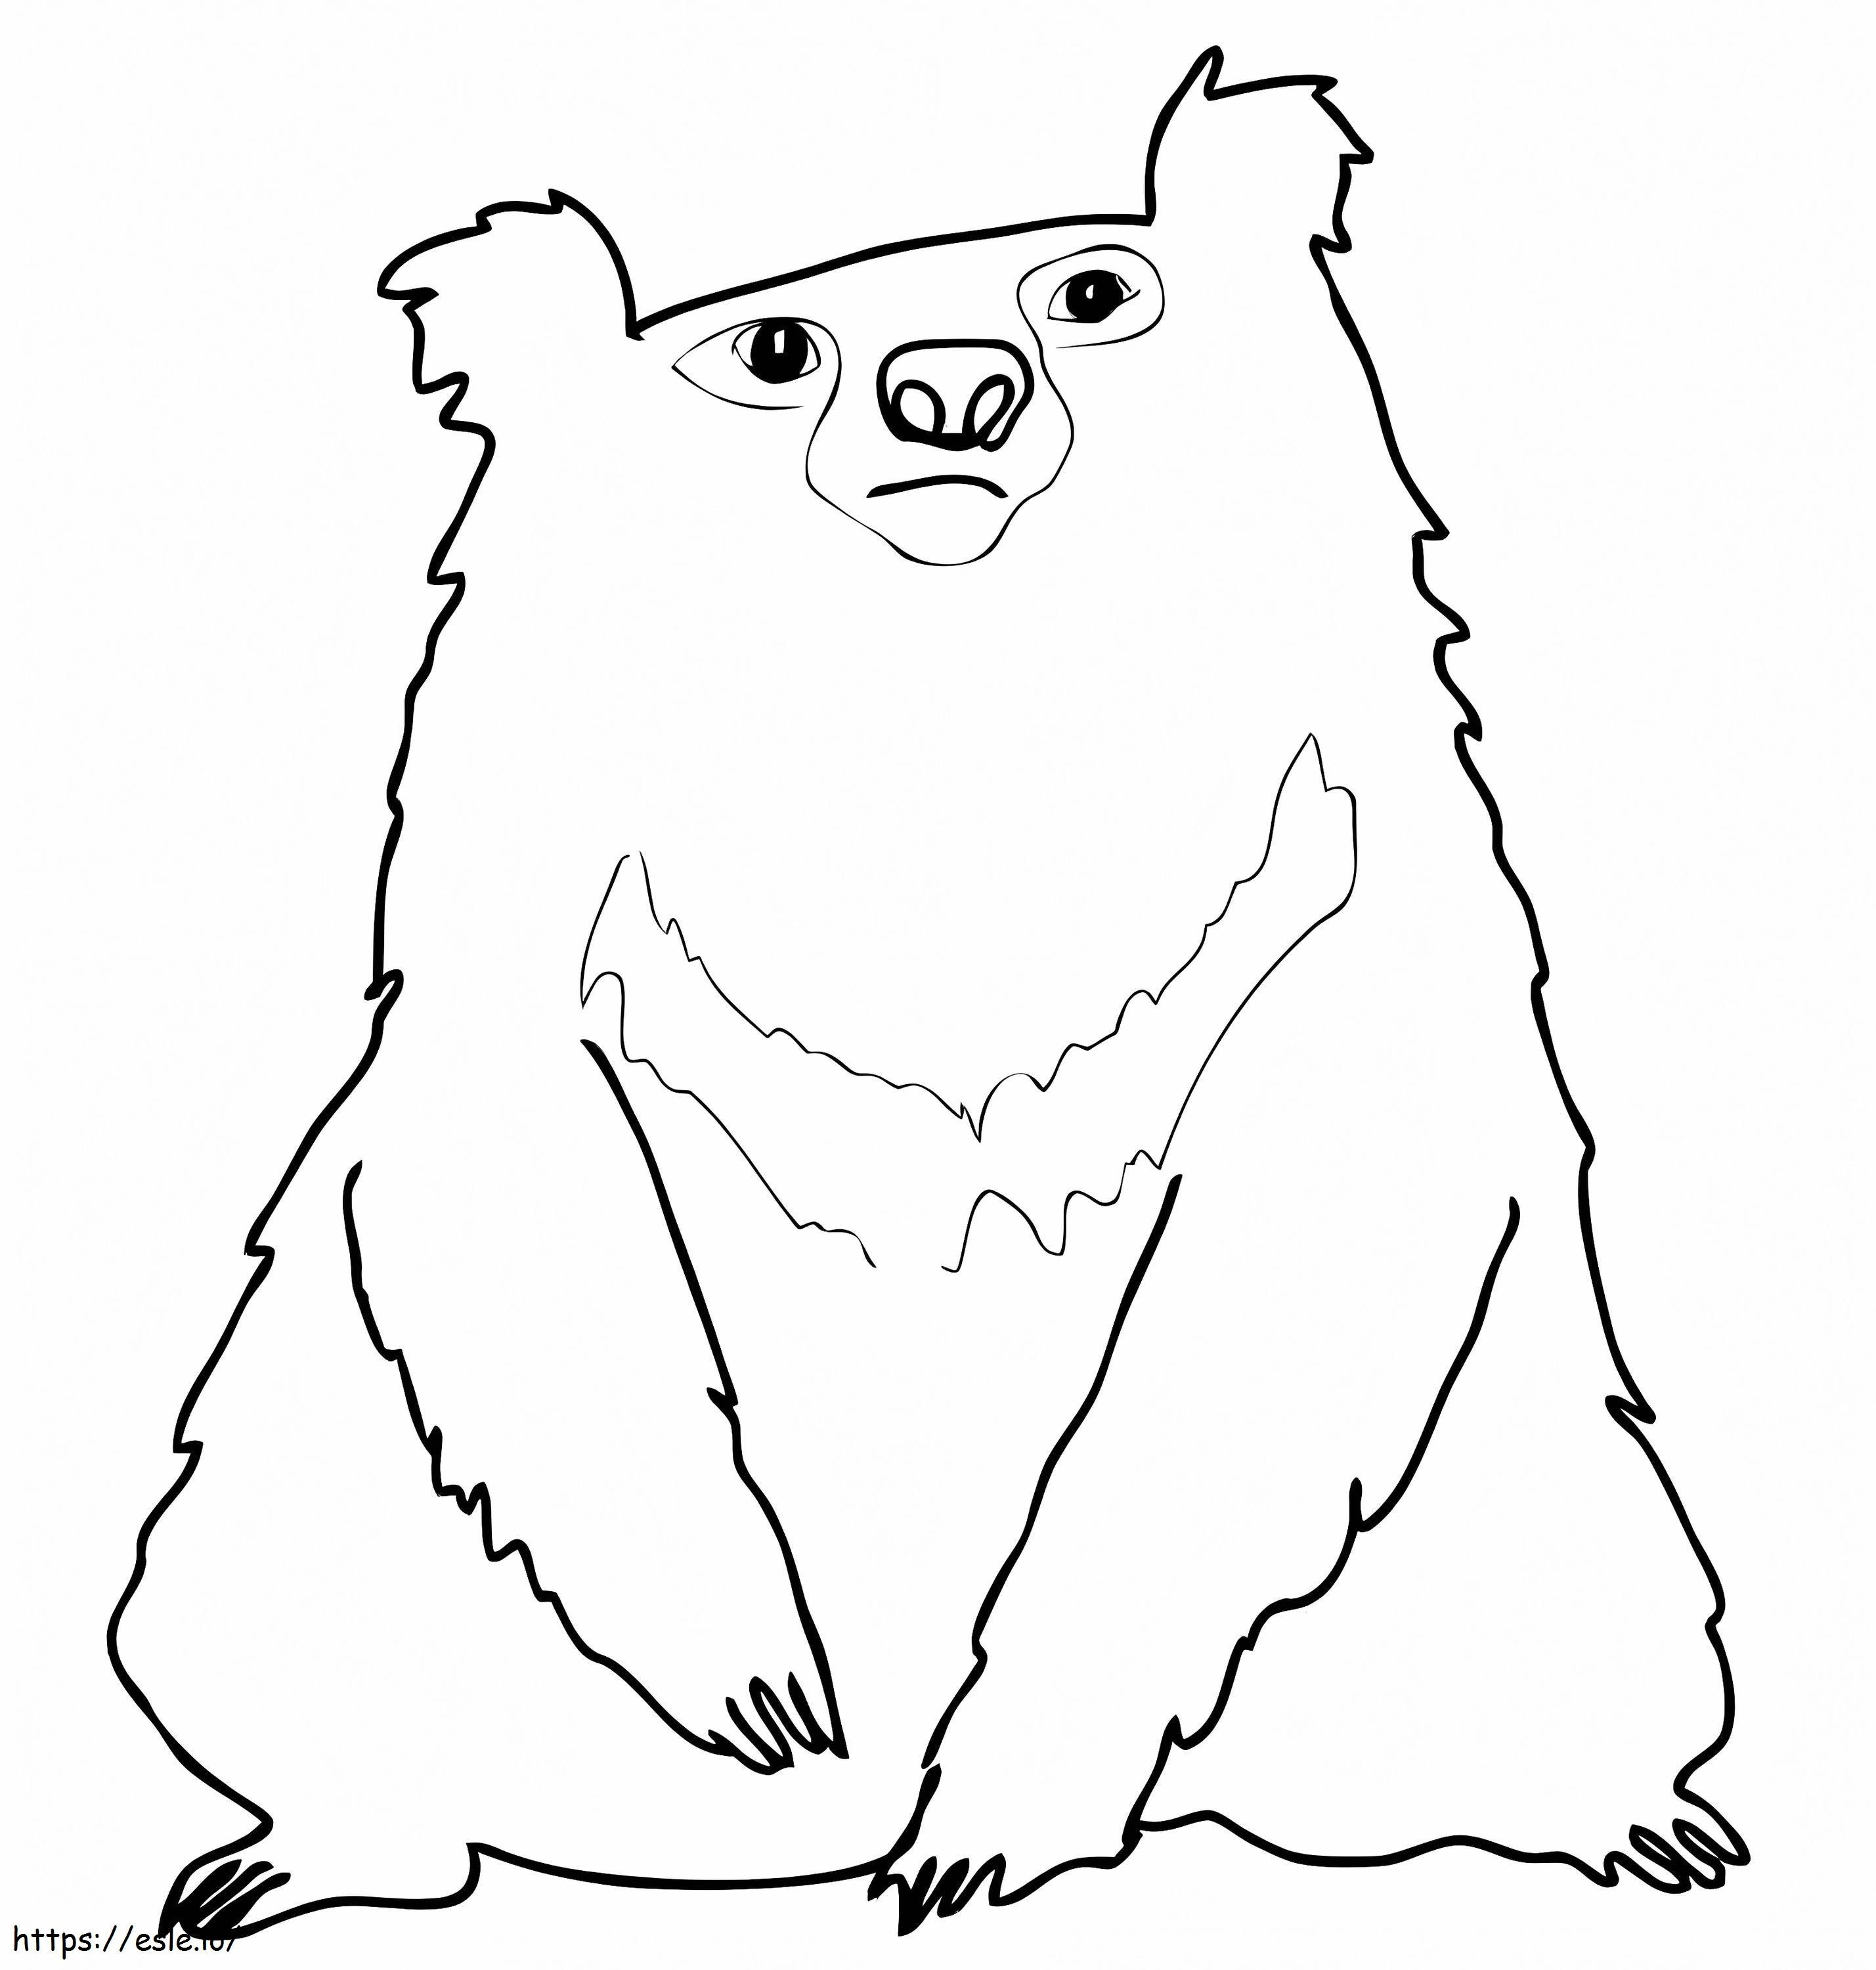 Indian Sloth Sitting coloring page